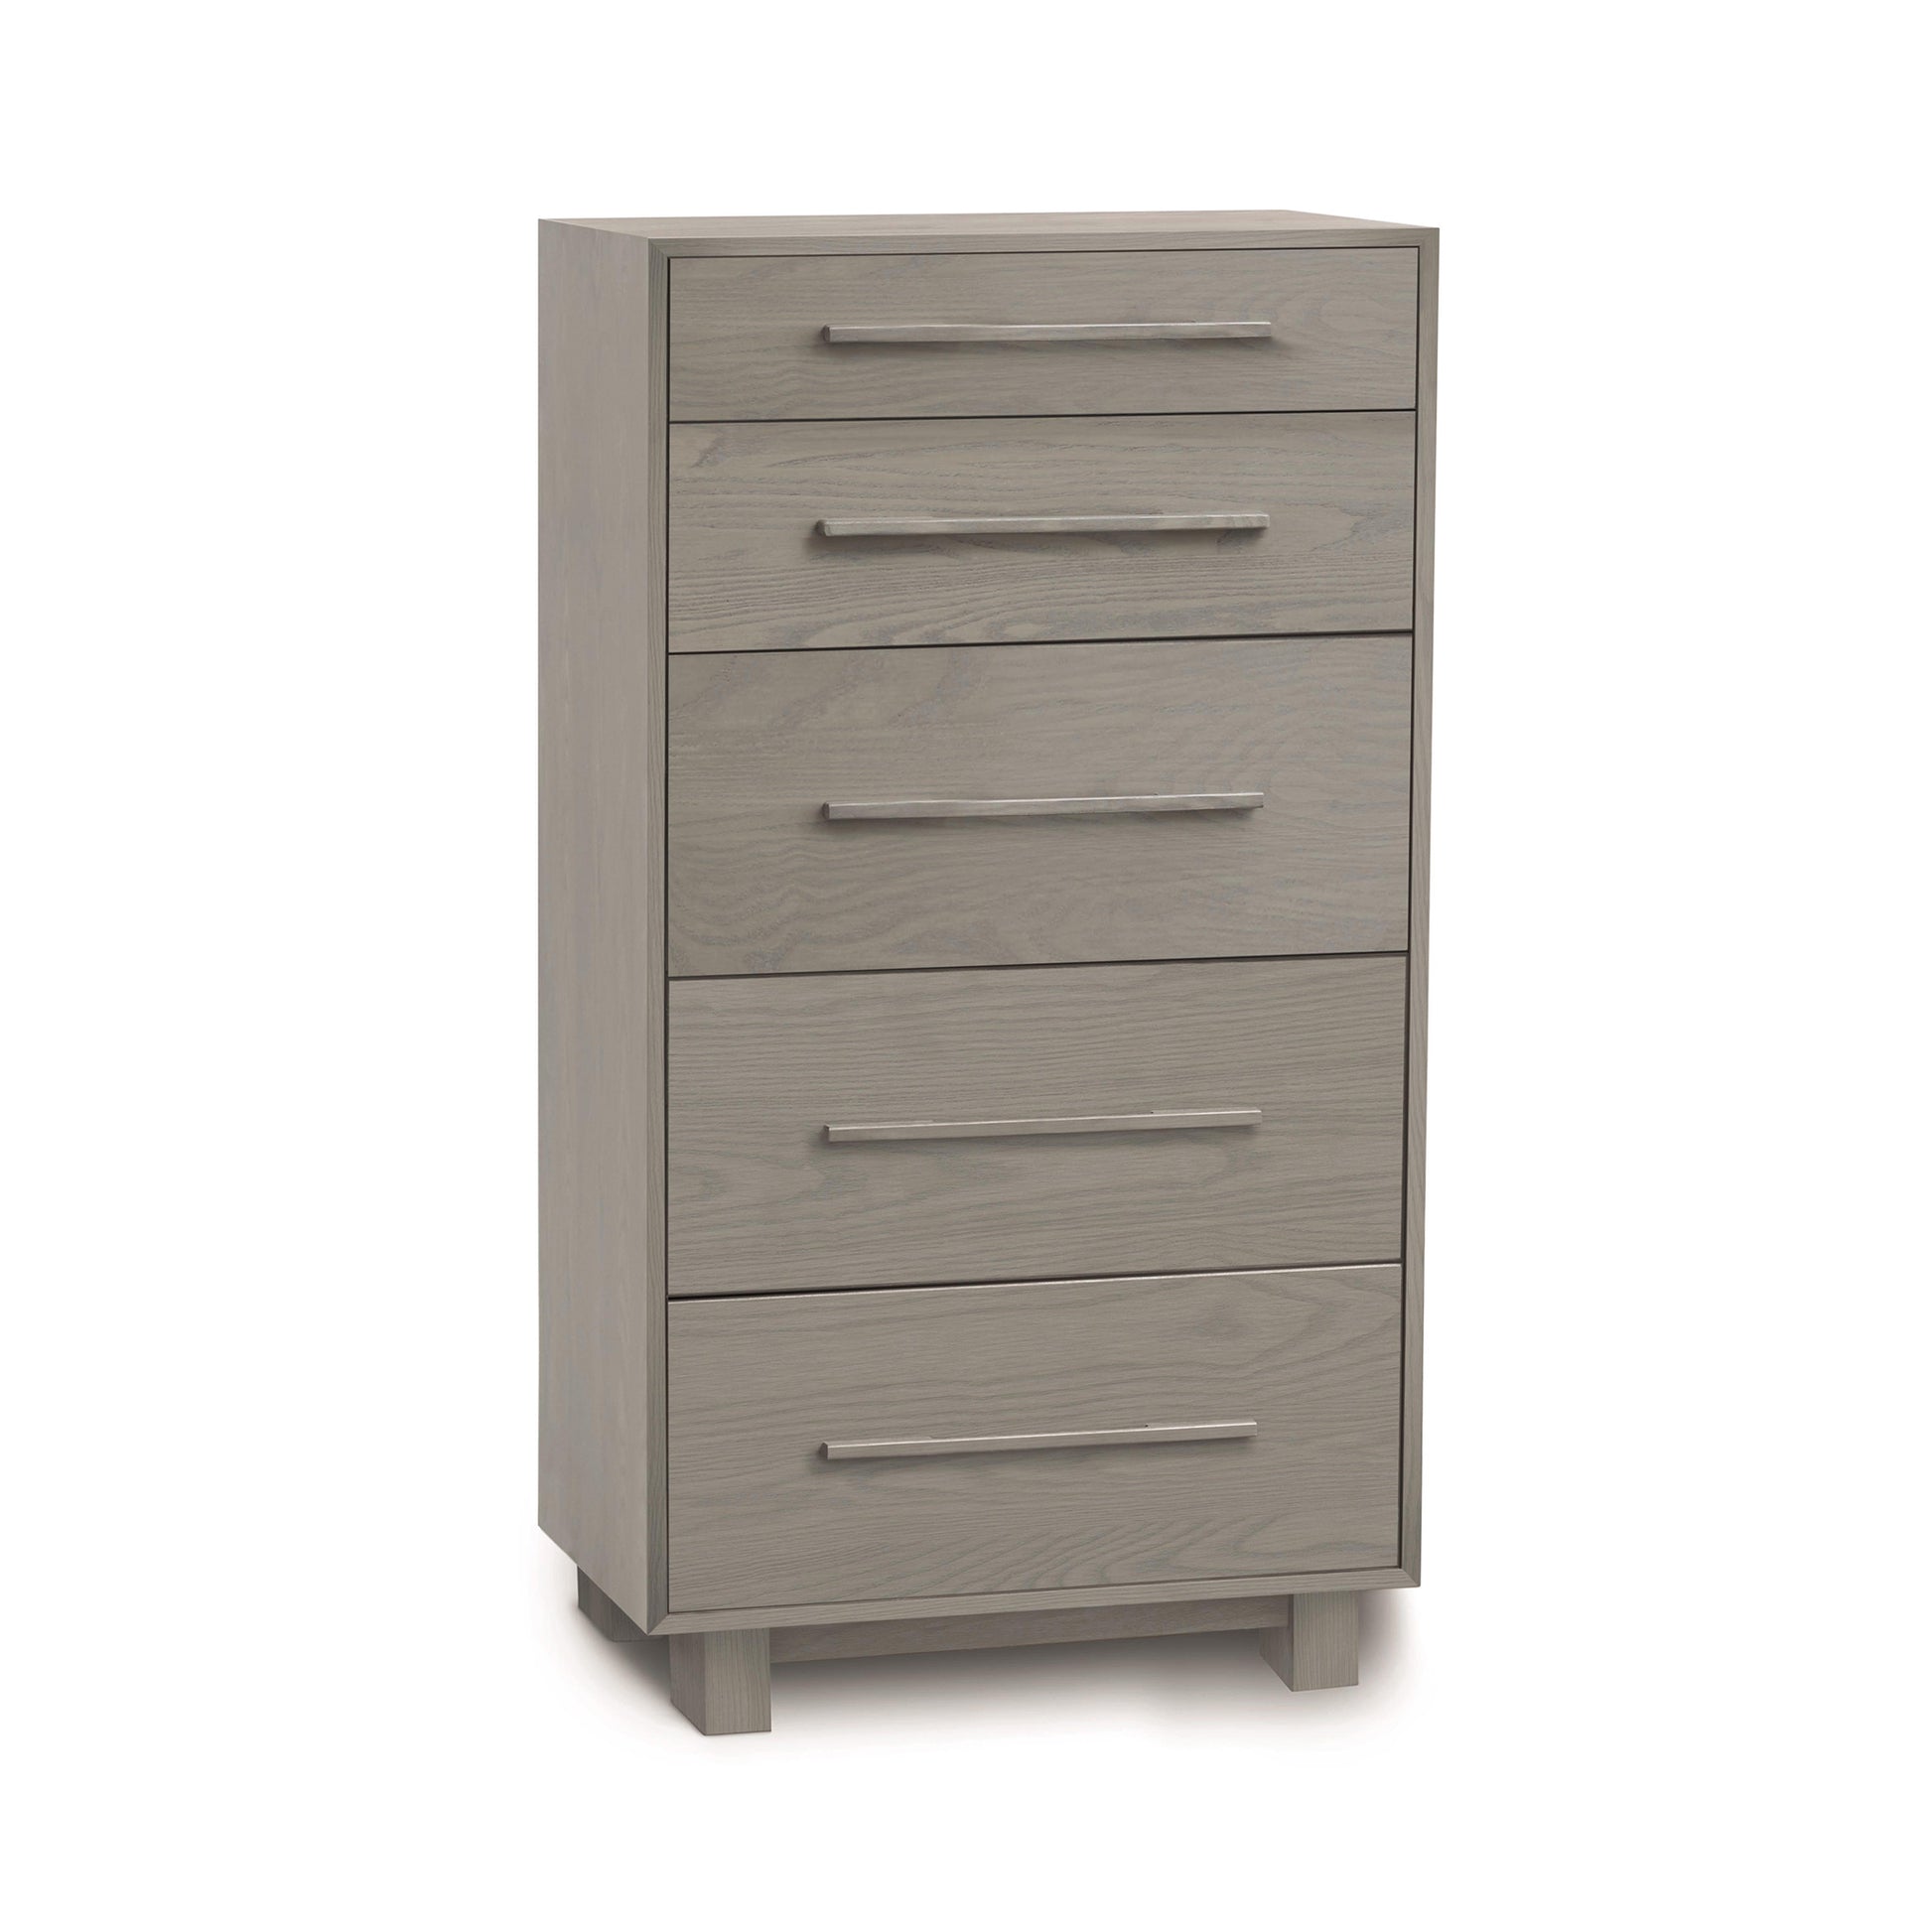 A modern bedroom furniture piece - a grey chest of drawers by Copeland Furniture, named the Sloane 5-Drawer Narrow Chest, set on a clean white background.